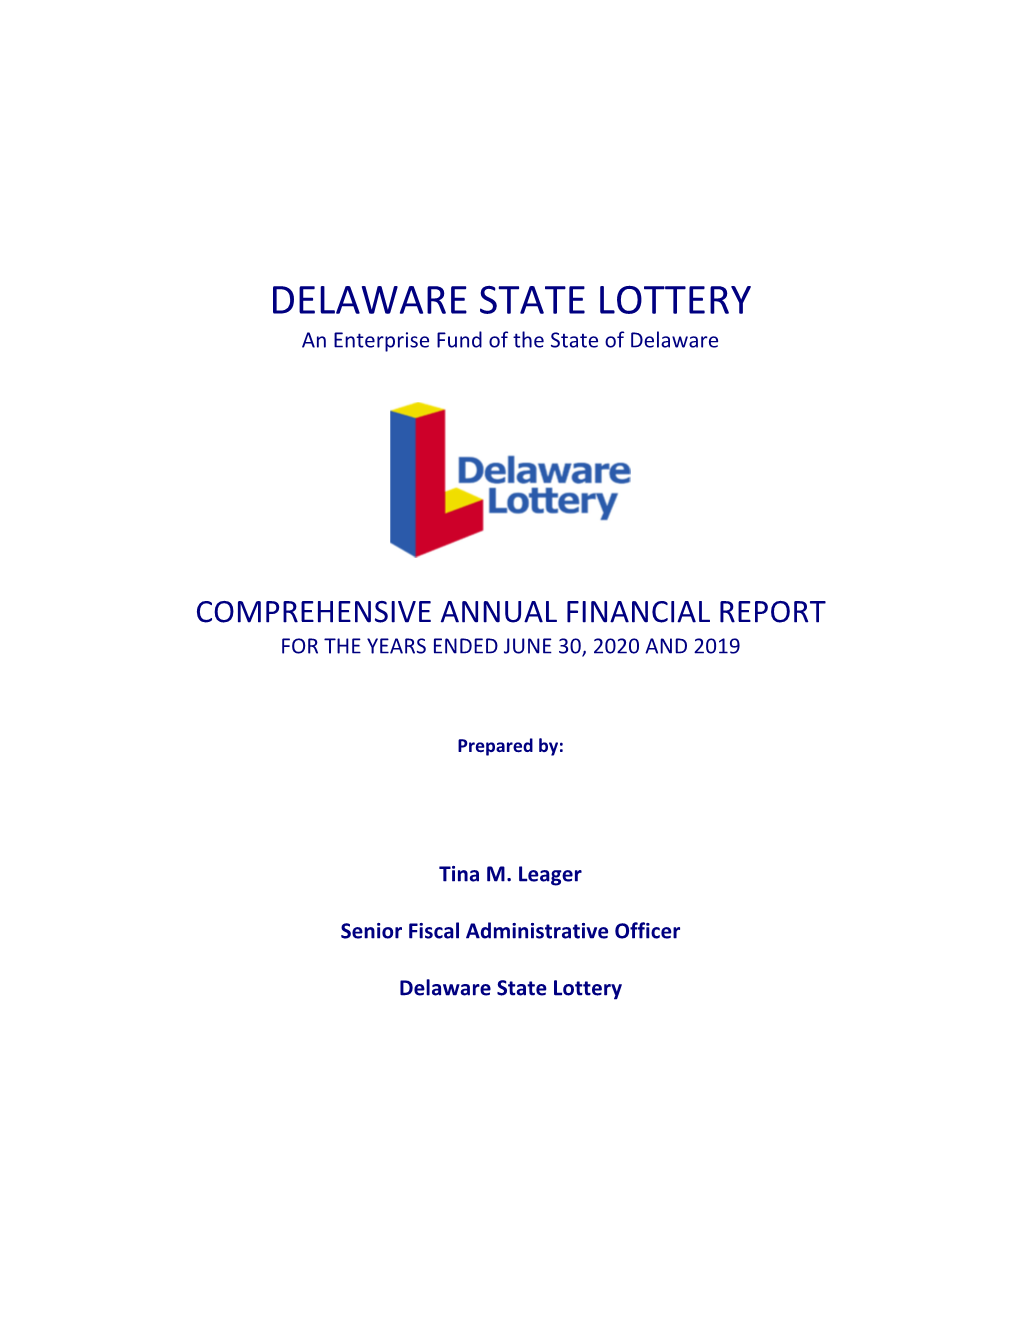 DELAWARE STATE LOTTERY an Enterprise Fund of the State of Delaware